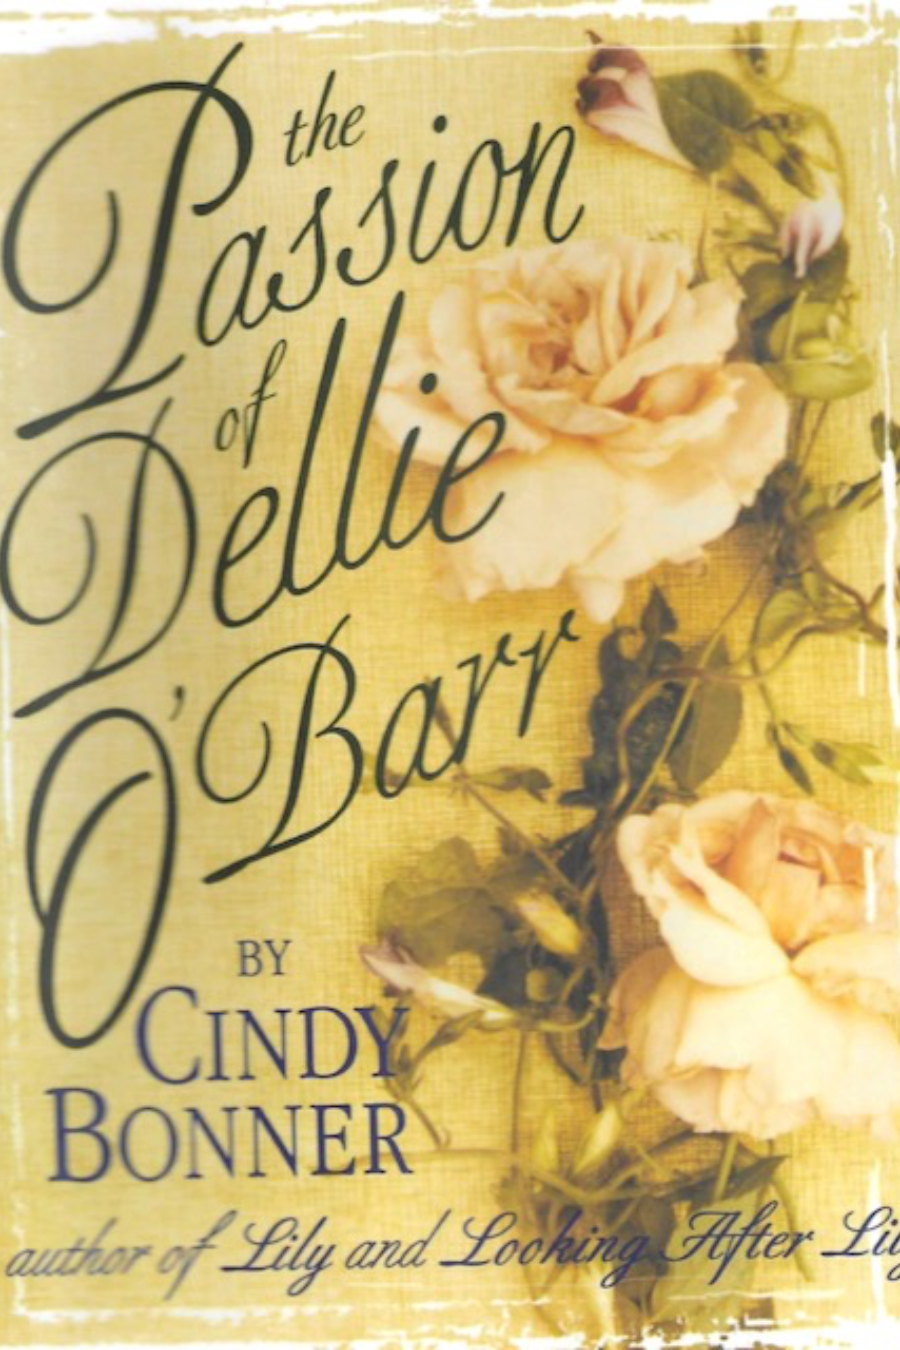 THE PASSION OF DELLIE O'BARR Image